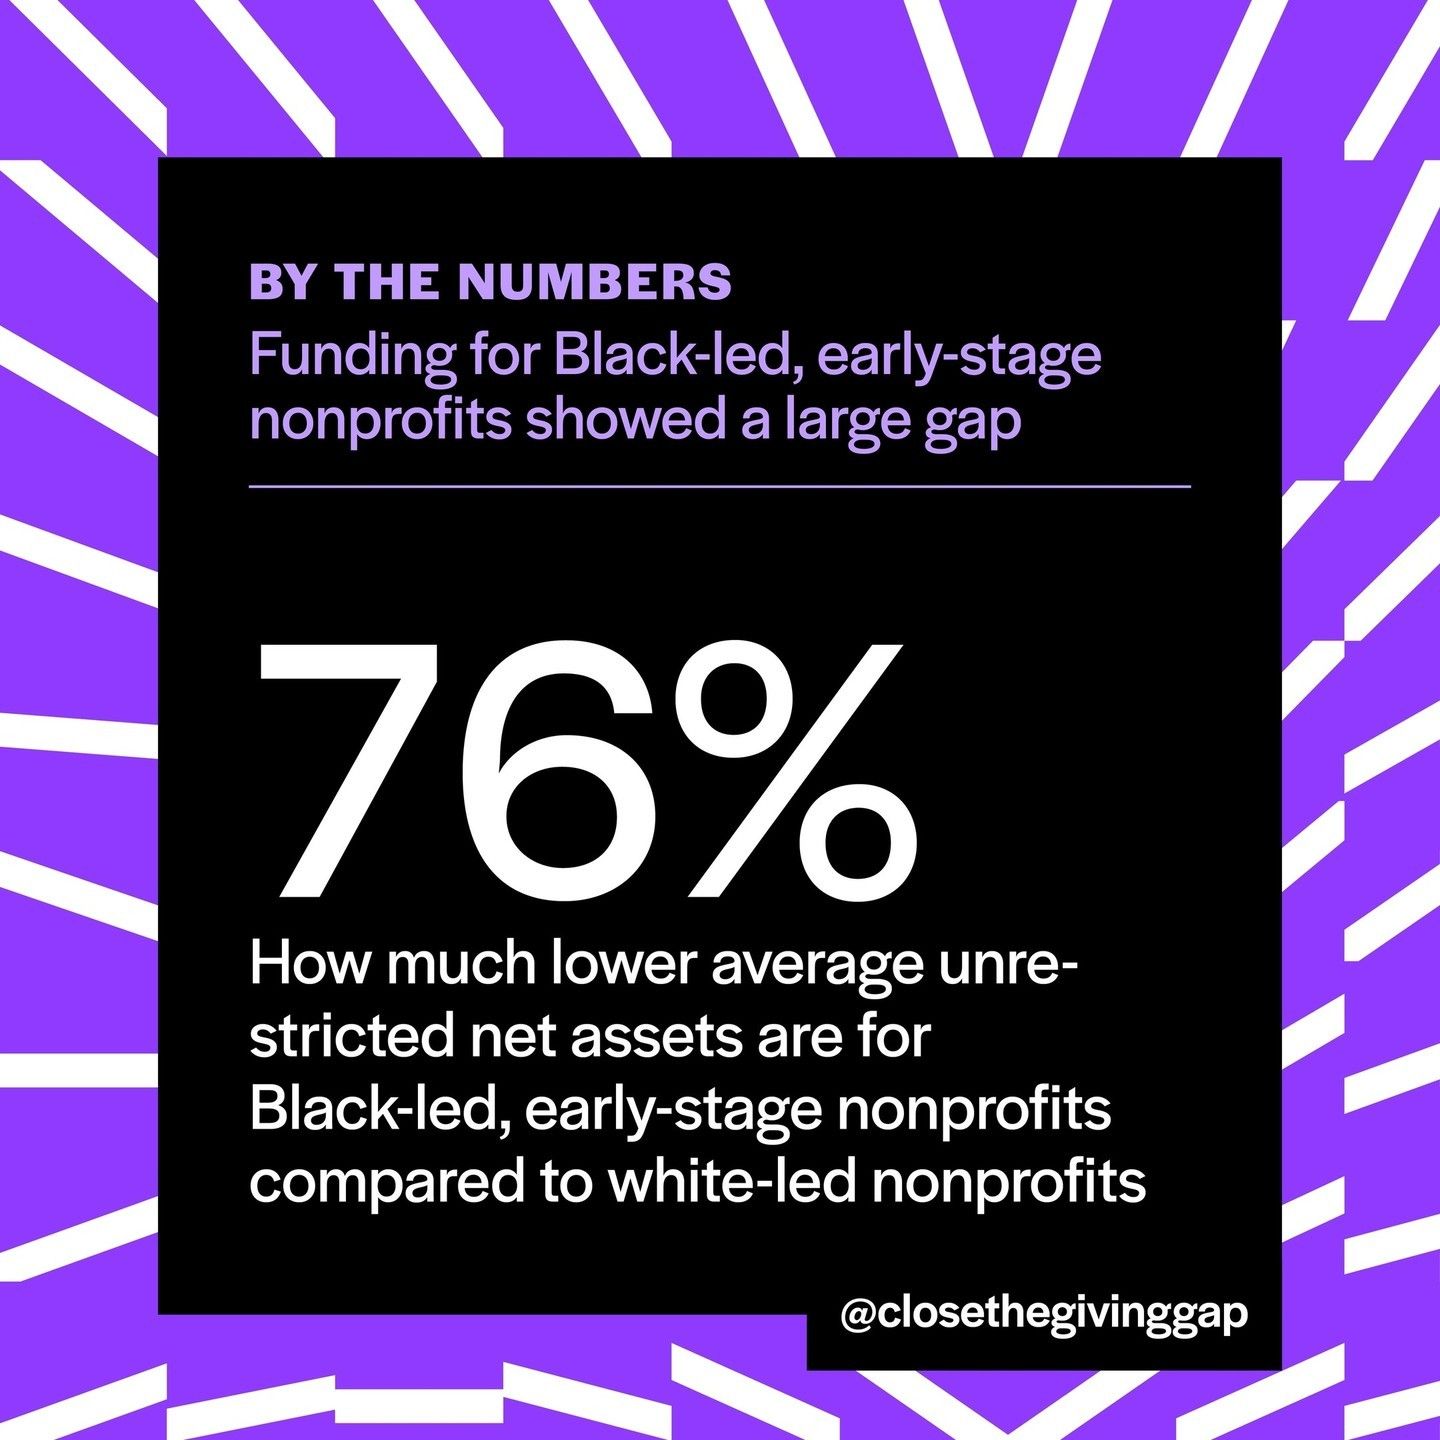 76% - That's how much lower average unrestricted net assets are for Black-led, early-stage nonprofits compared to white-led nonprofits.